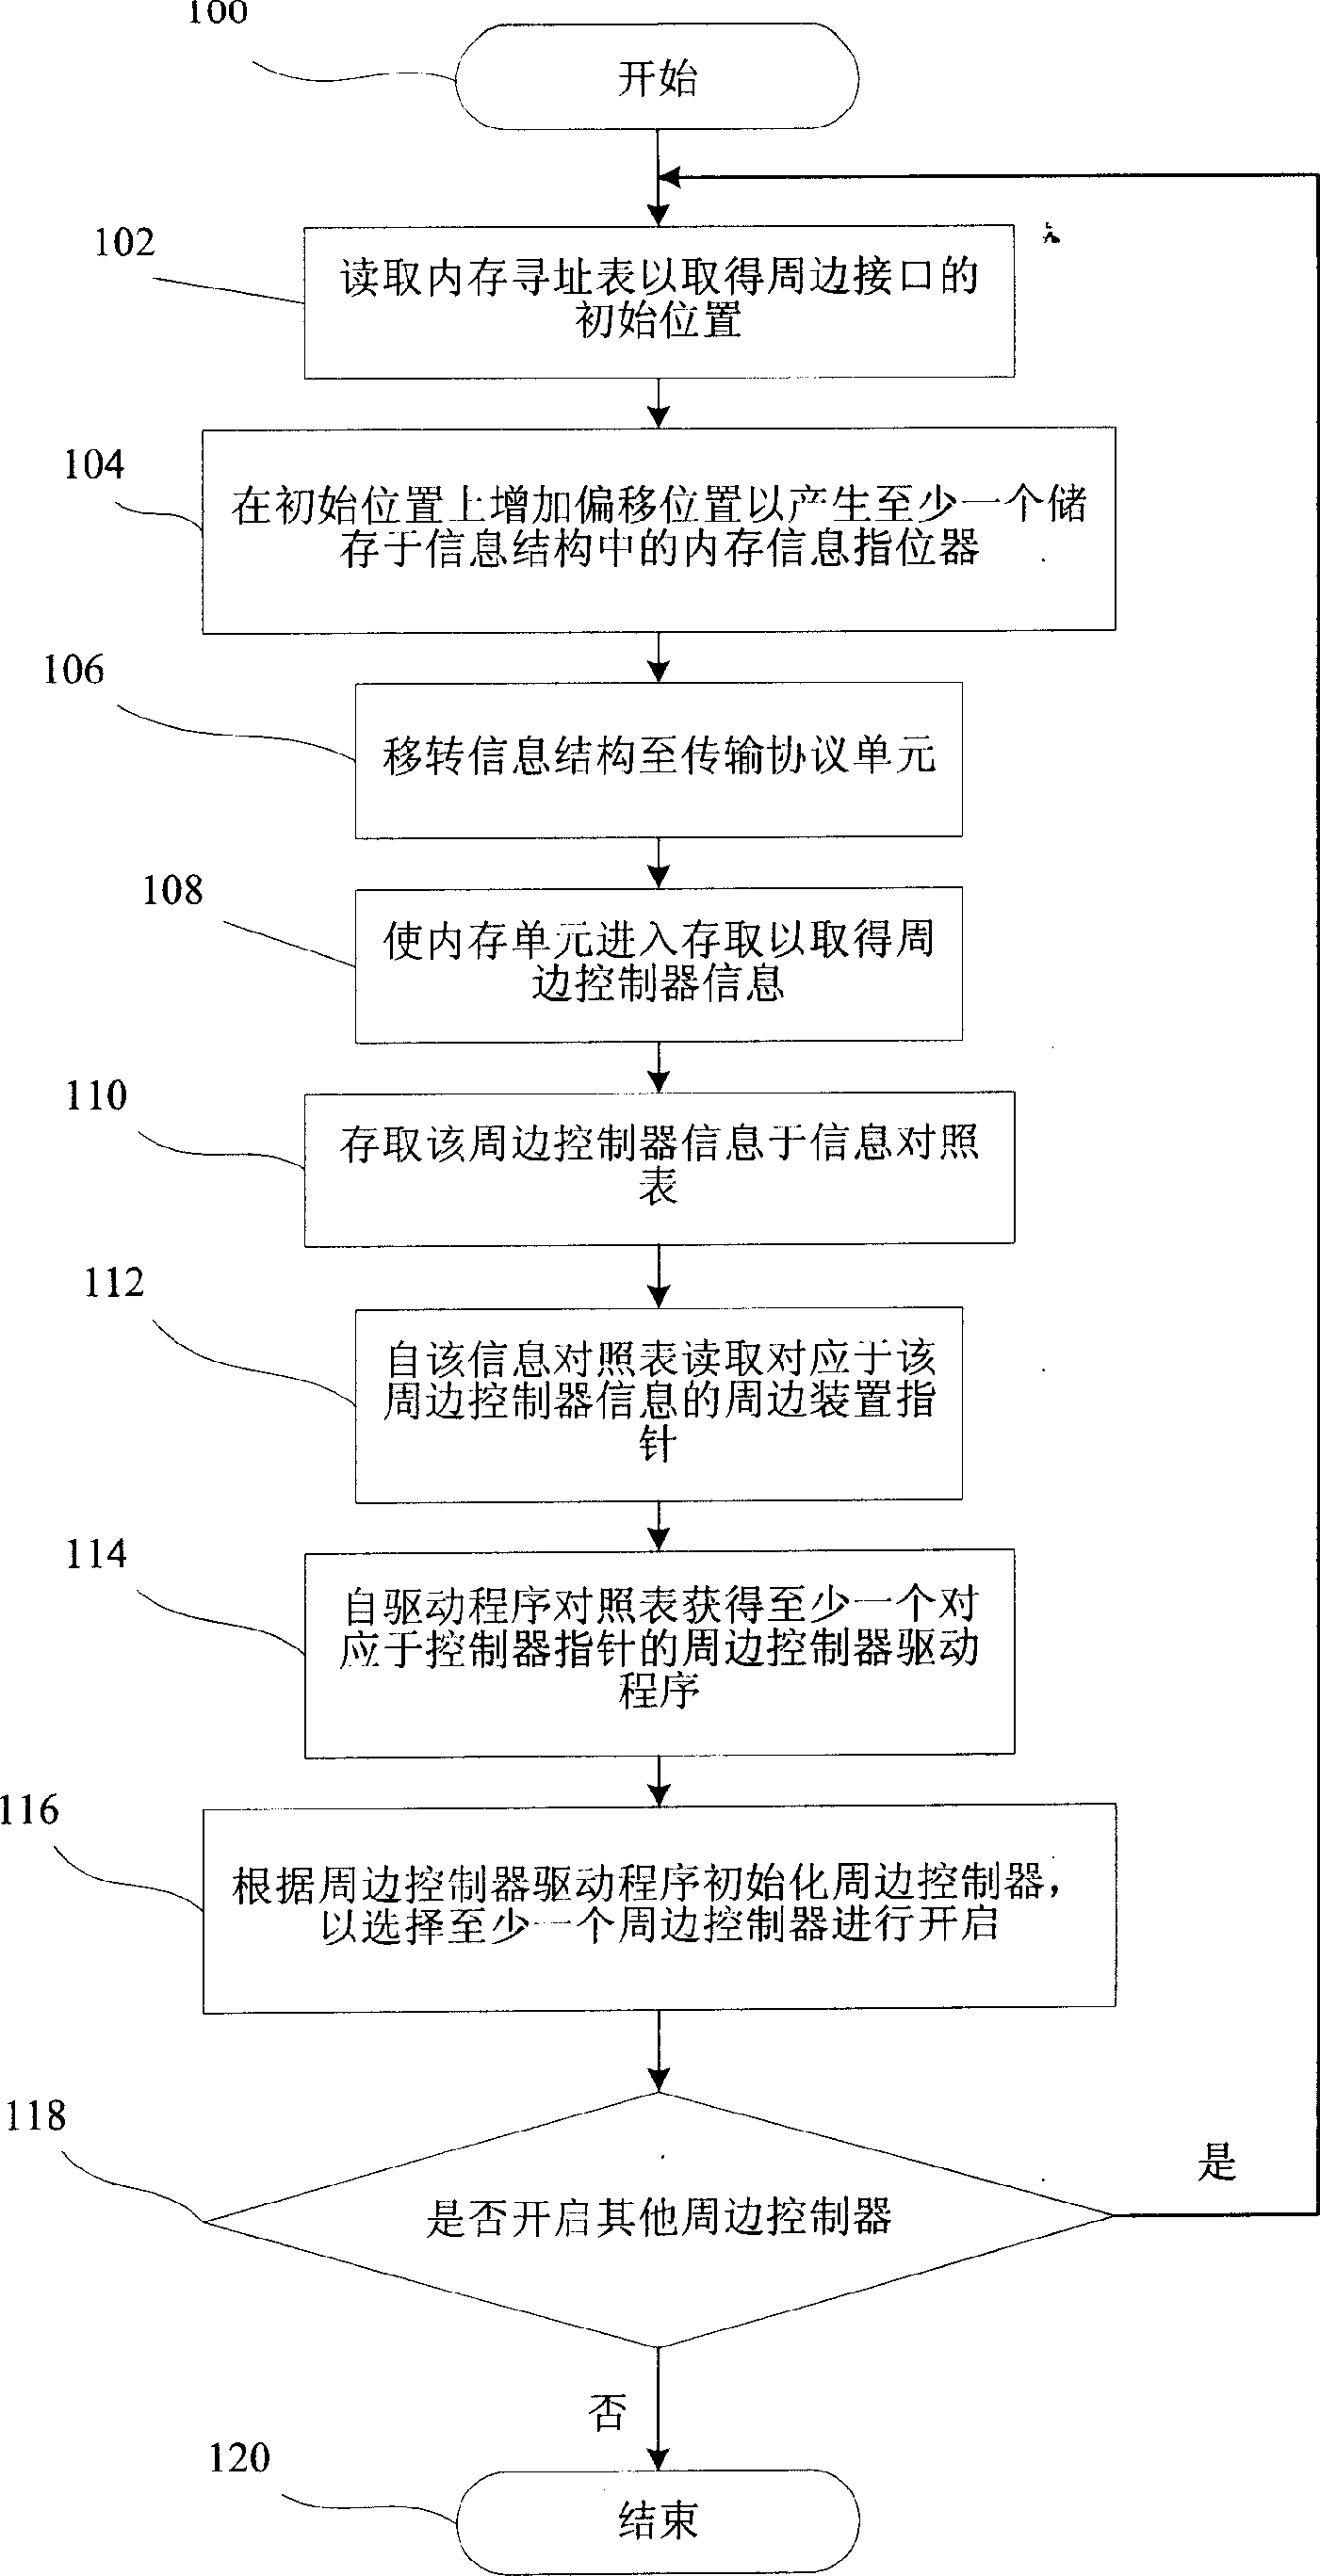 System of managing peripheral interfaces in ipmi architecture and method thereof